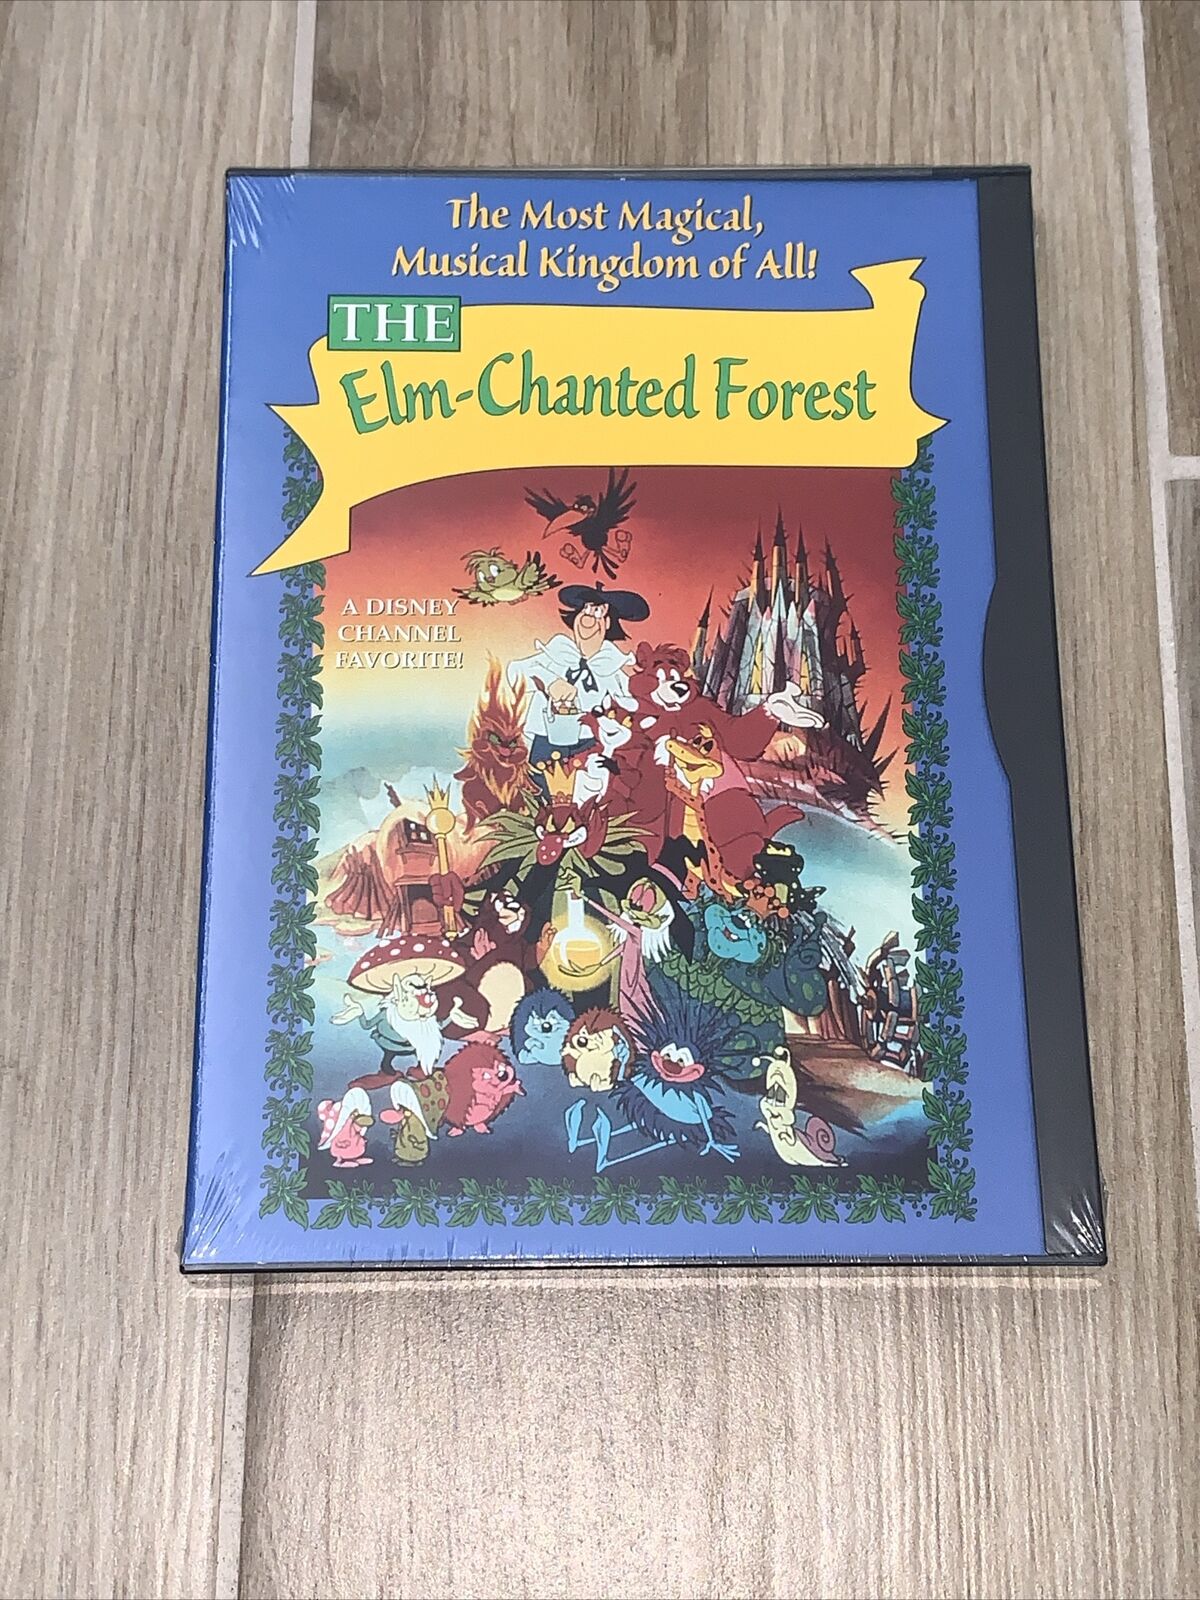 NEW - The Elm-Chanted Forest (DVD 1997) - SEALED